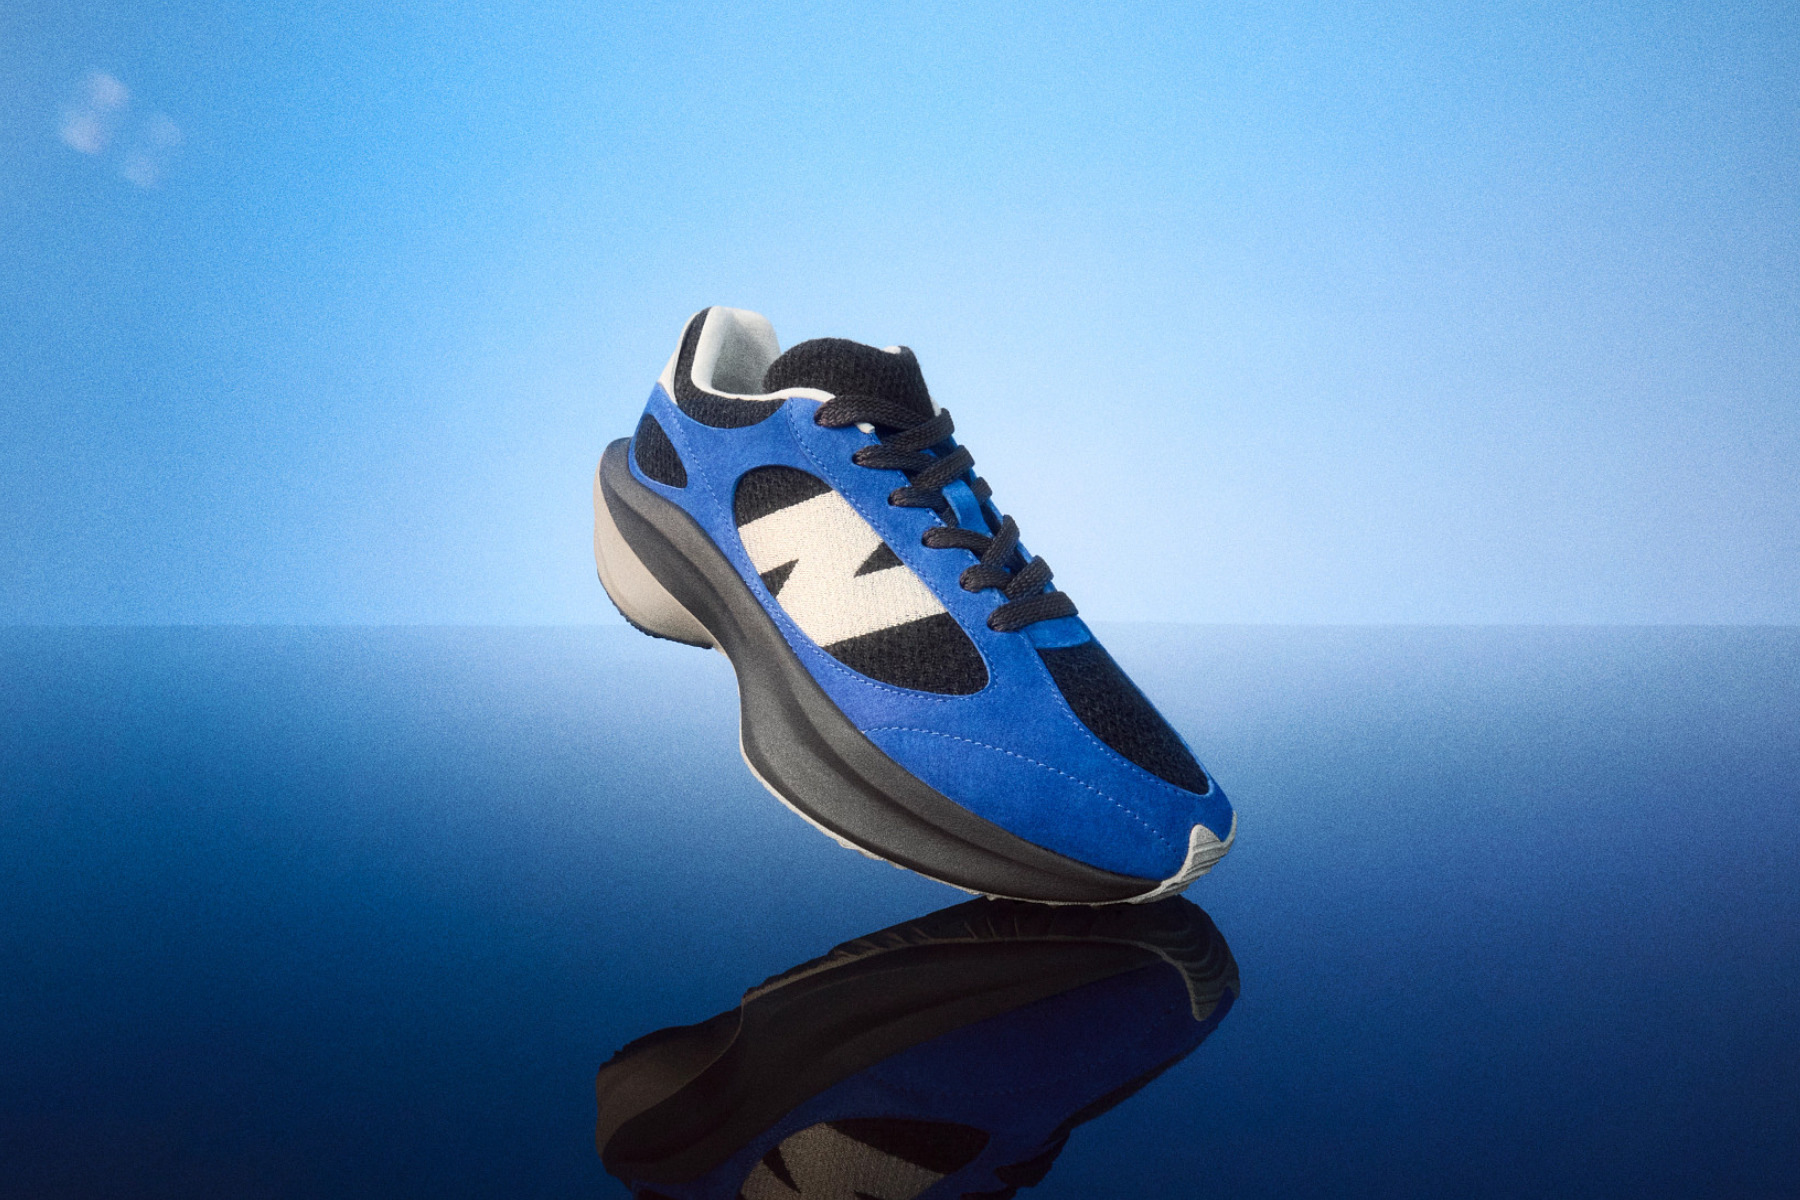 New Balance's WRPD Runner silhouette returns for FW23 in two new colorways.